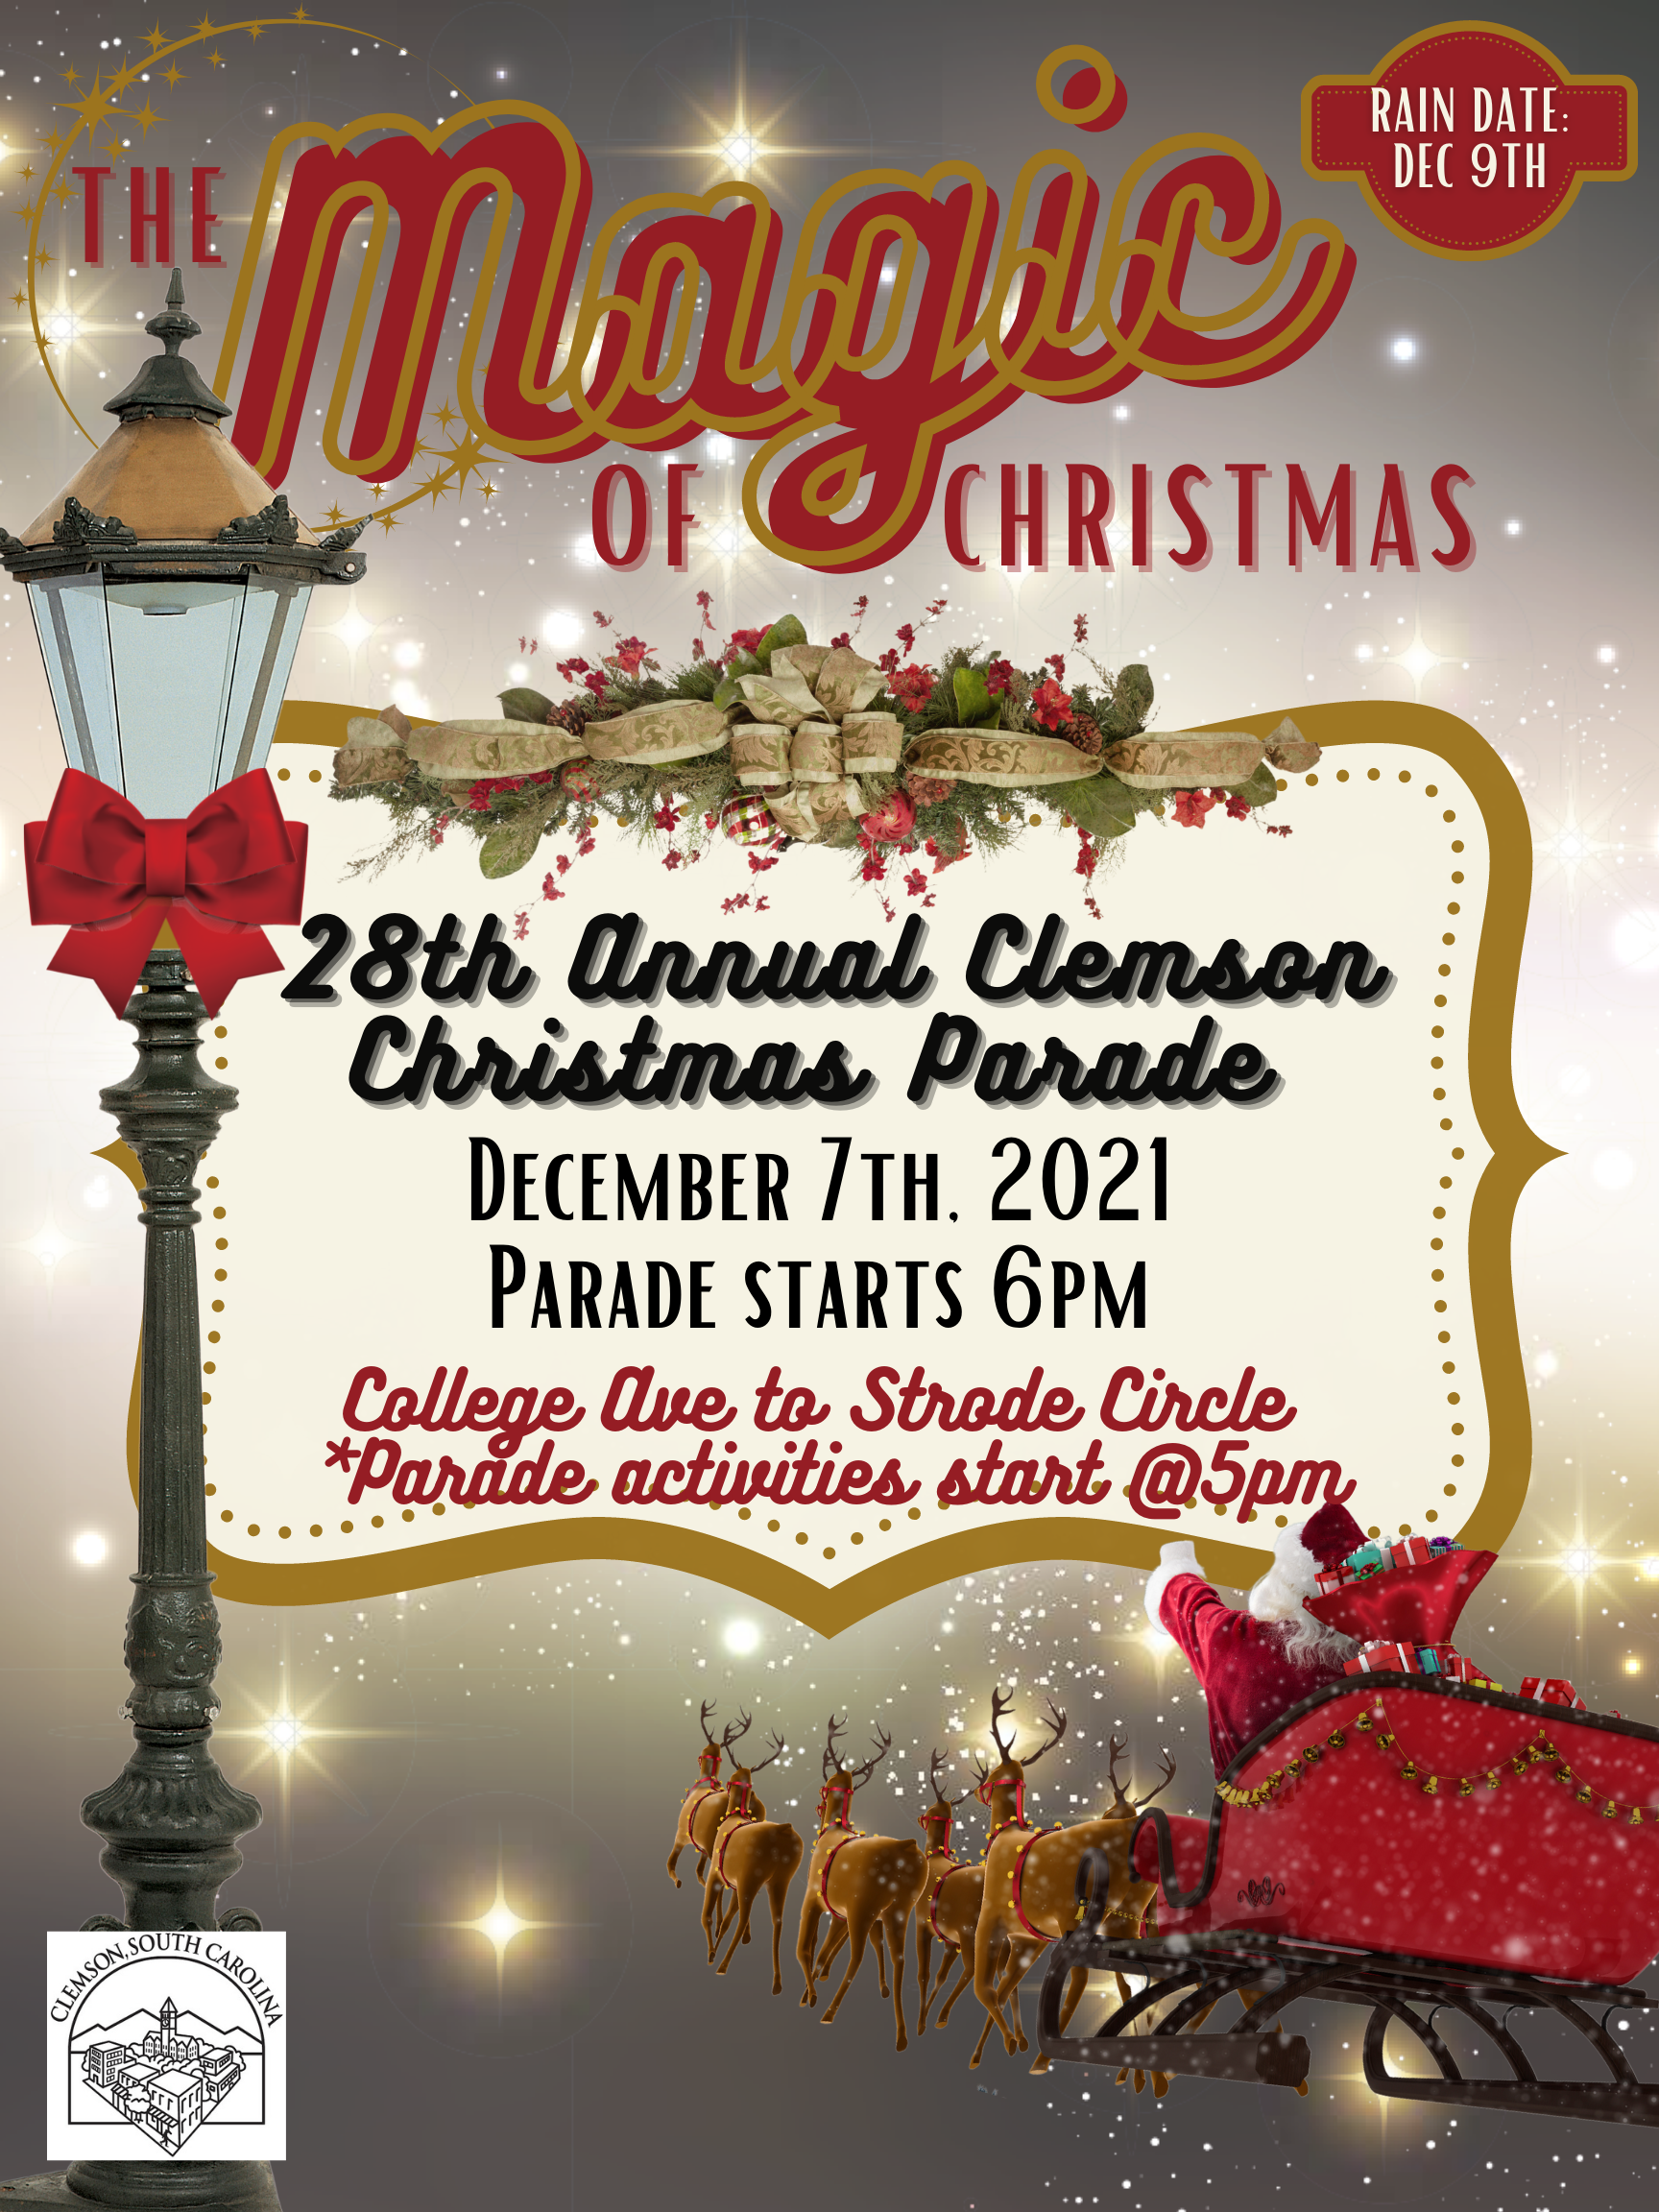 College Avenue December 7th Parade starts at 6pm